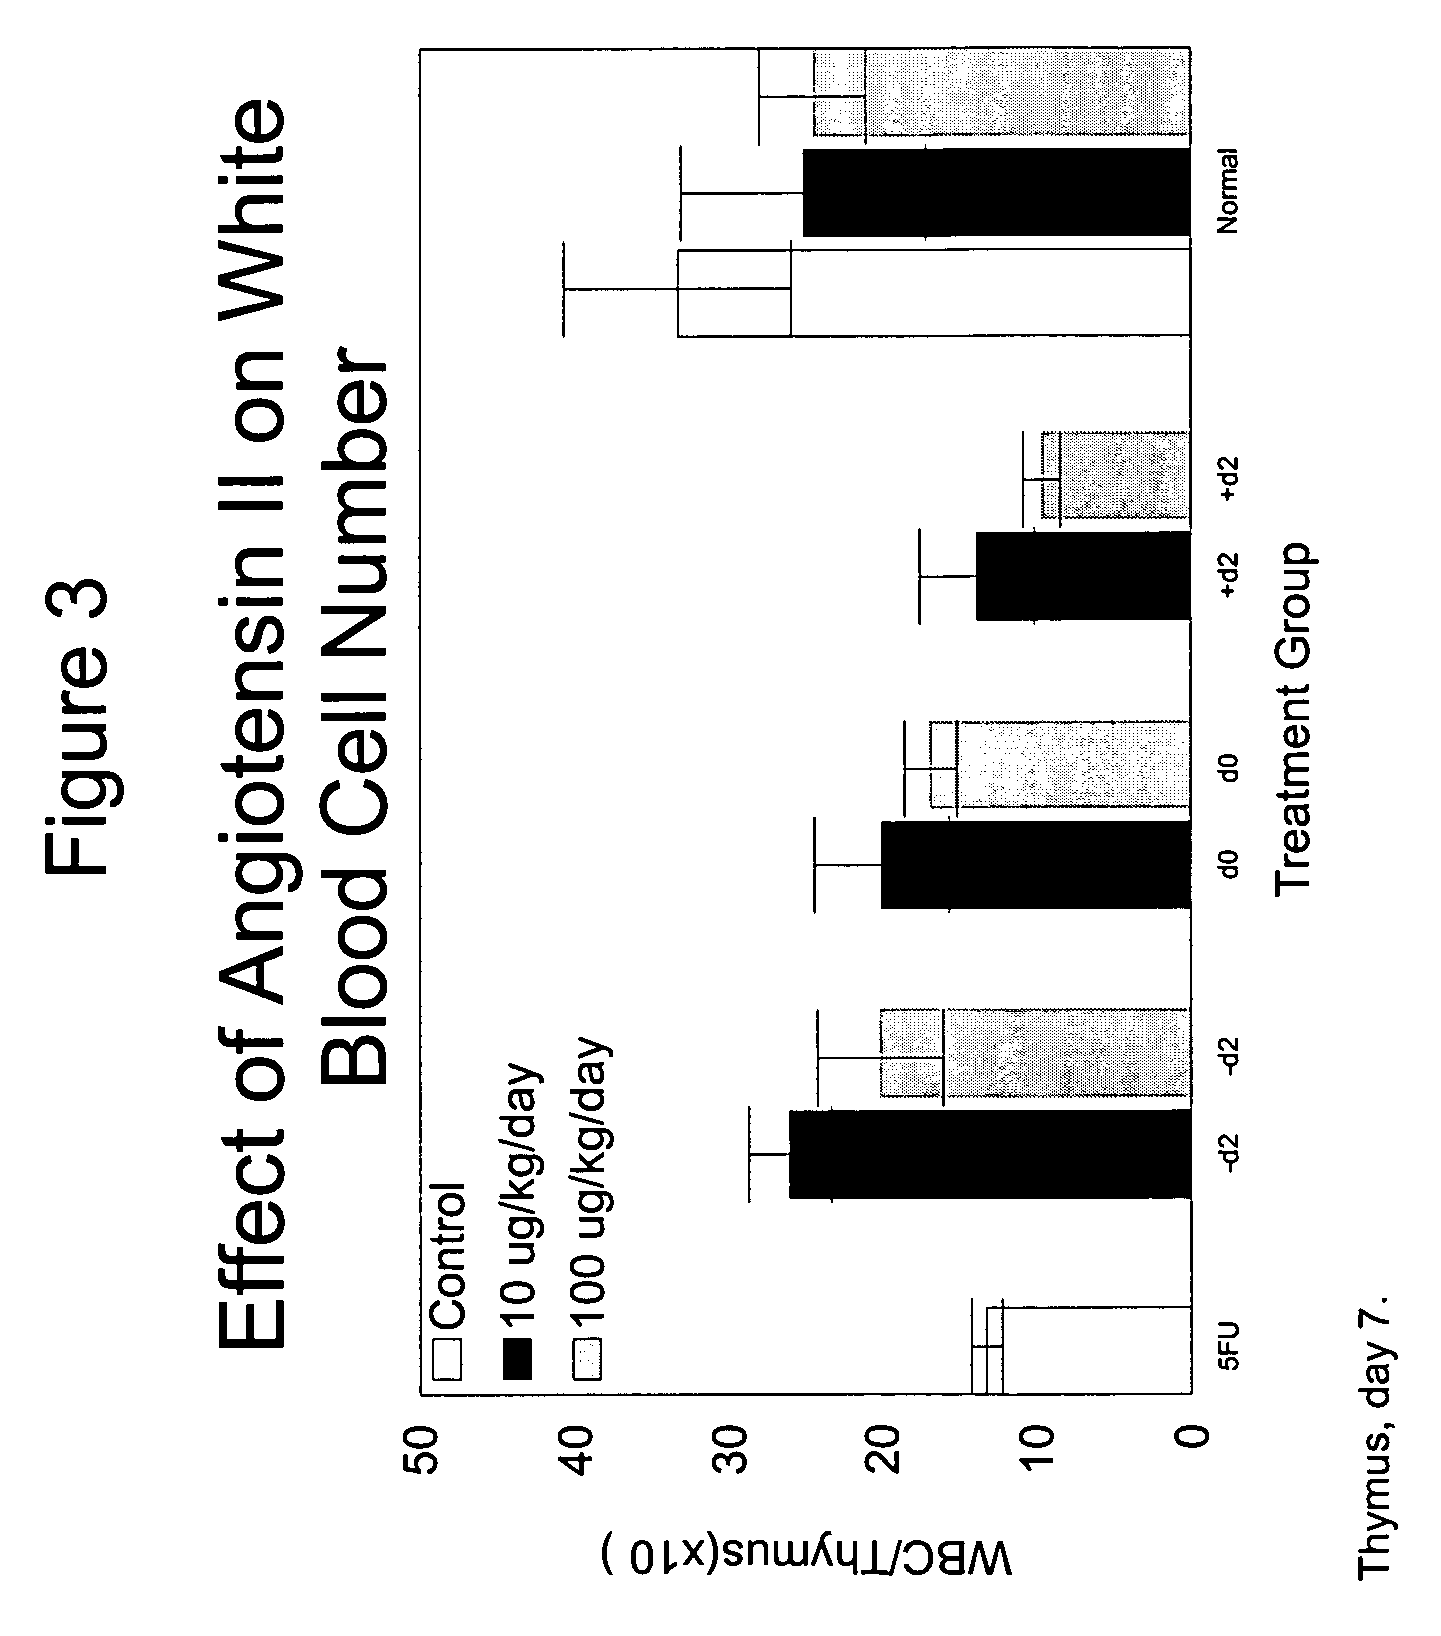 Methods for treating a patient undergoing chemotherapy